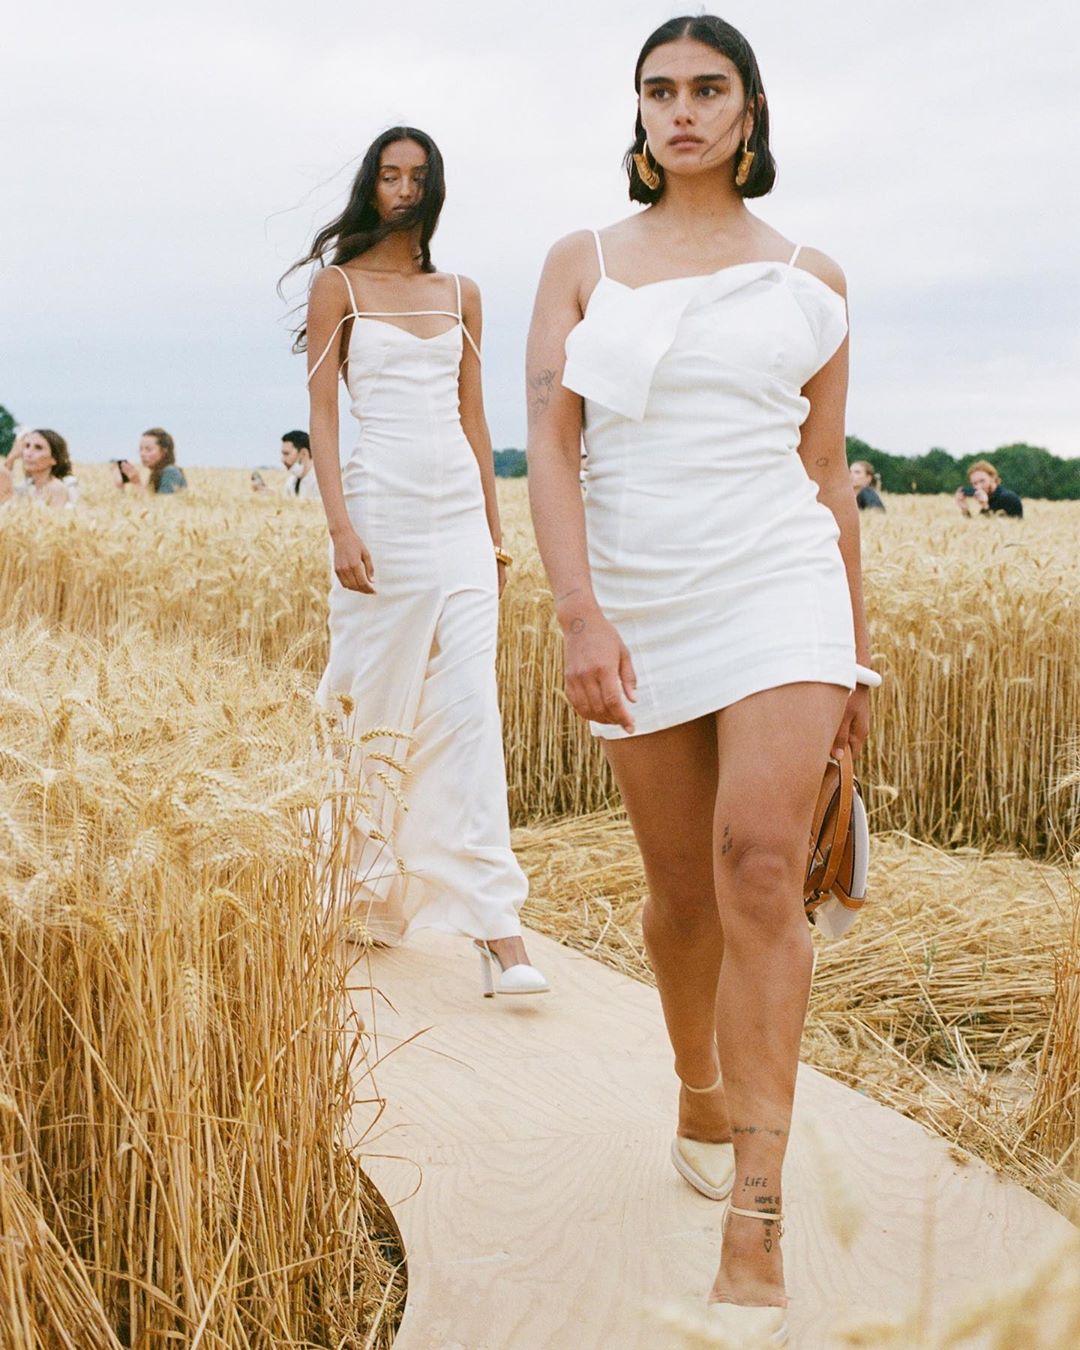 Jacquemus Runway Show S/S 2021: An Ode To L'Amour Set In An Immense Wheat  Field - Gals and the City